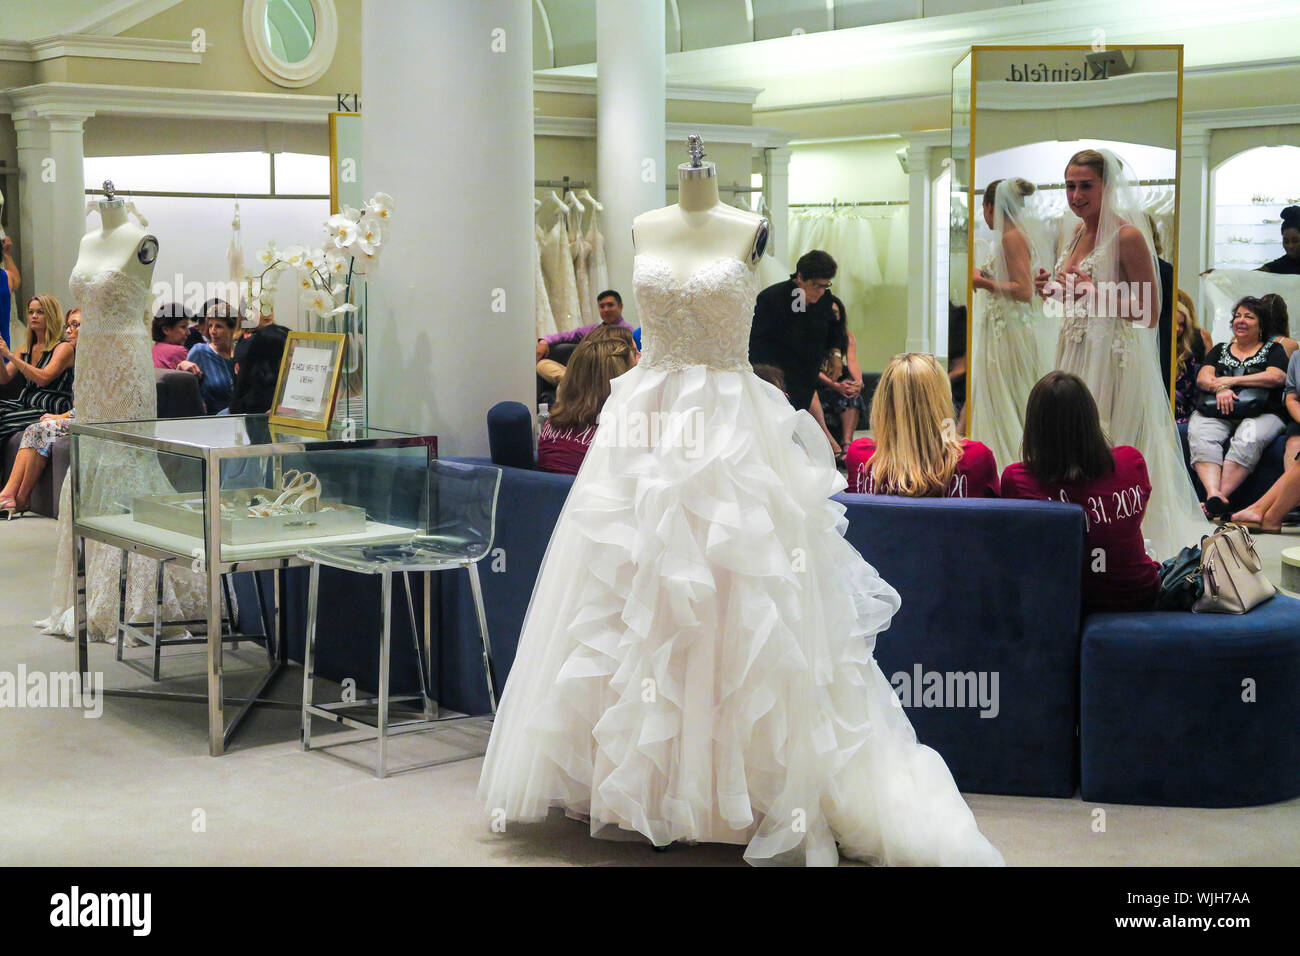 Kleinfeld Bridal, upscale bridal boutique and star of its own TV show, Say Yes to the Dress. NYC Stock Photo